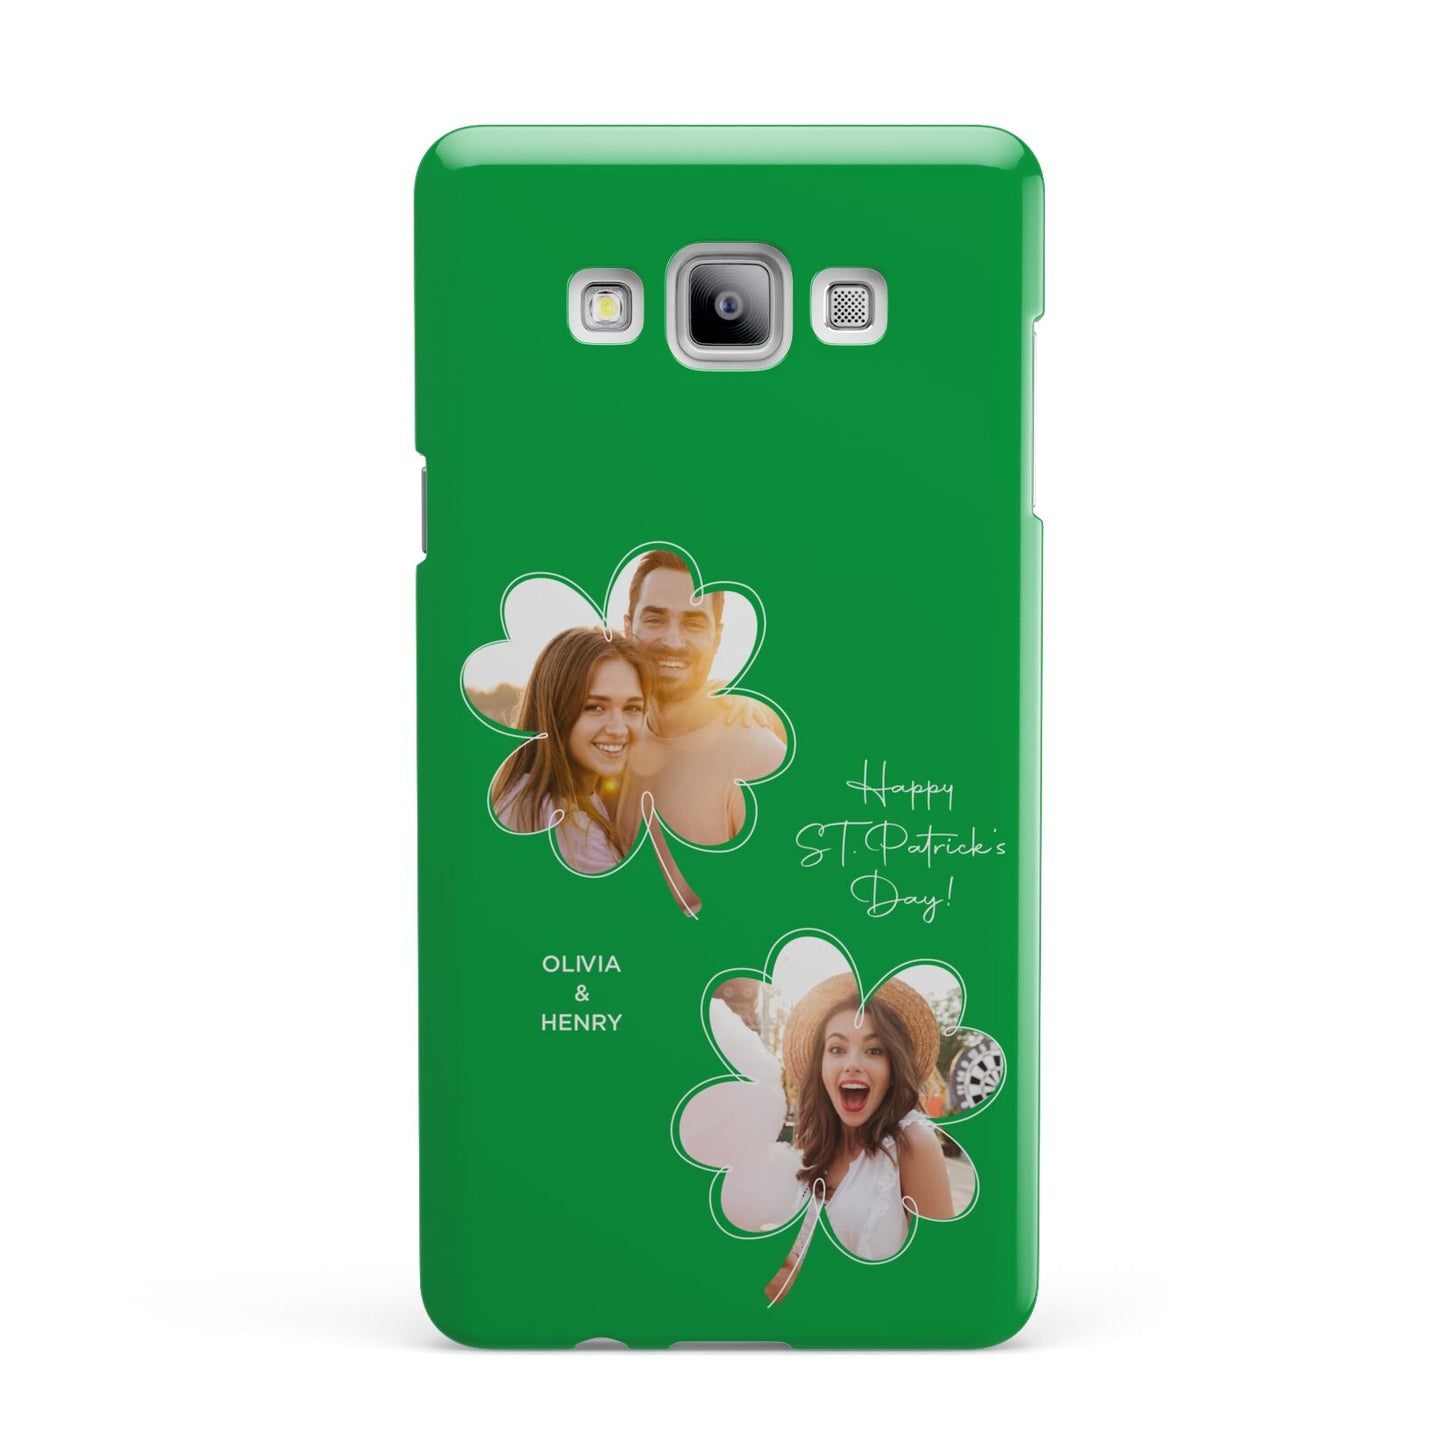 Personalised Photo St Patricks Day Samsung Galaxy A7 2015 Case